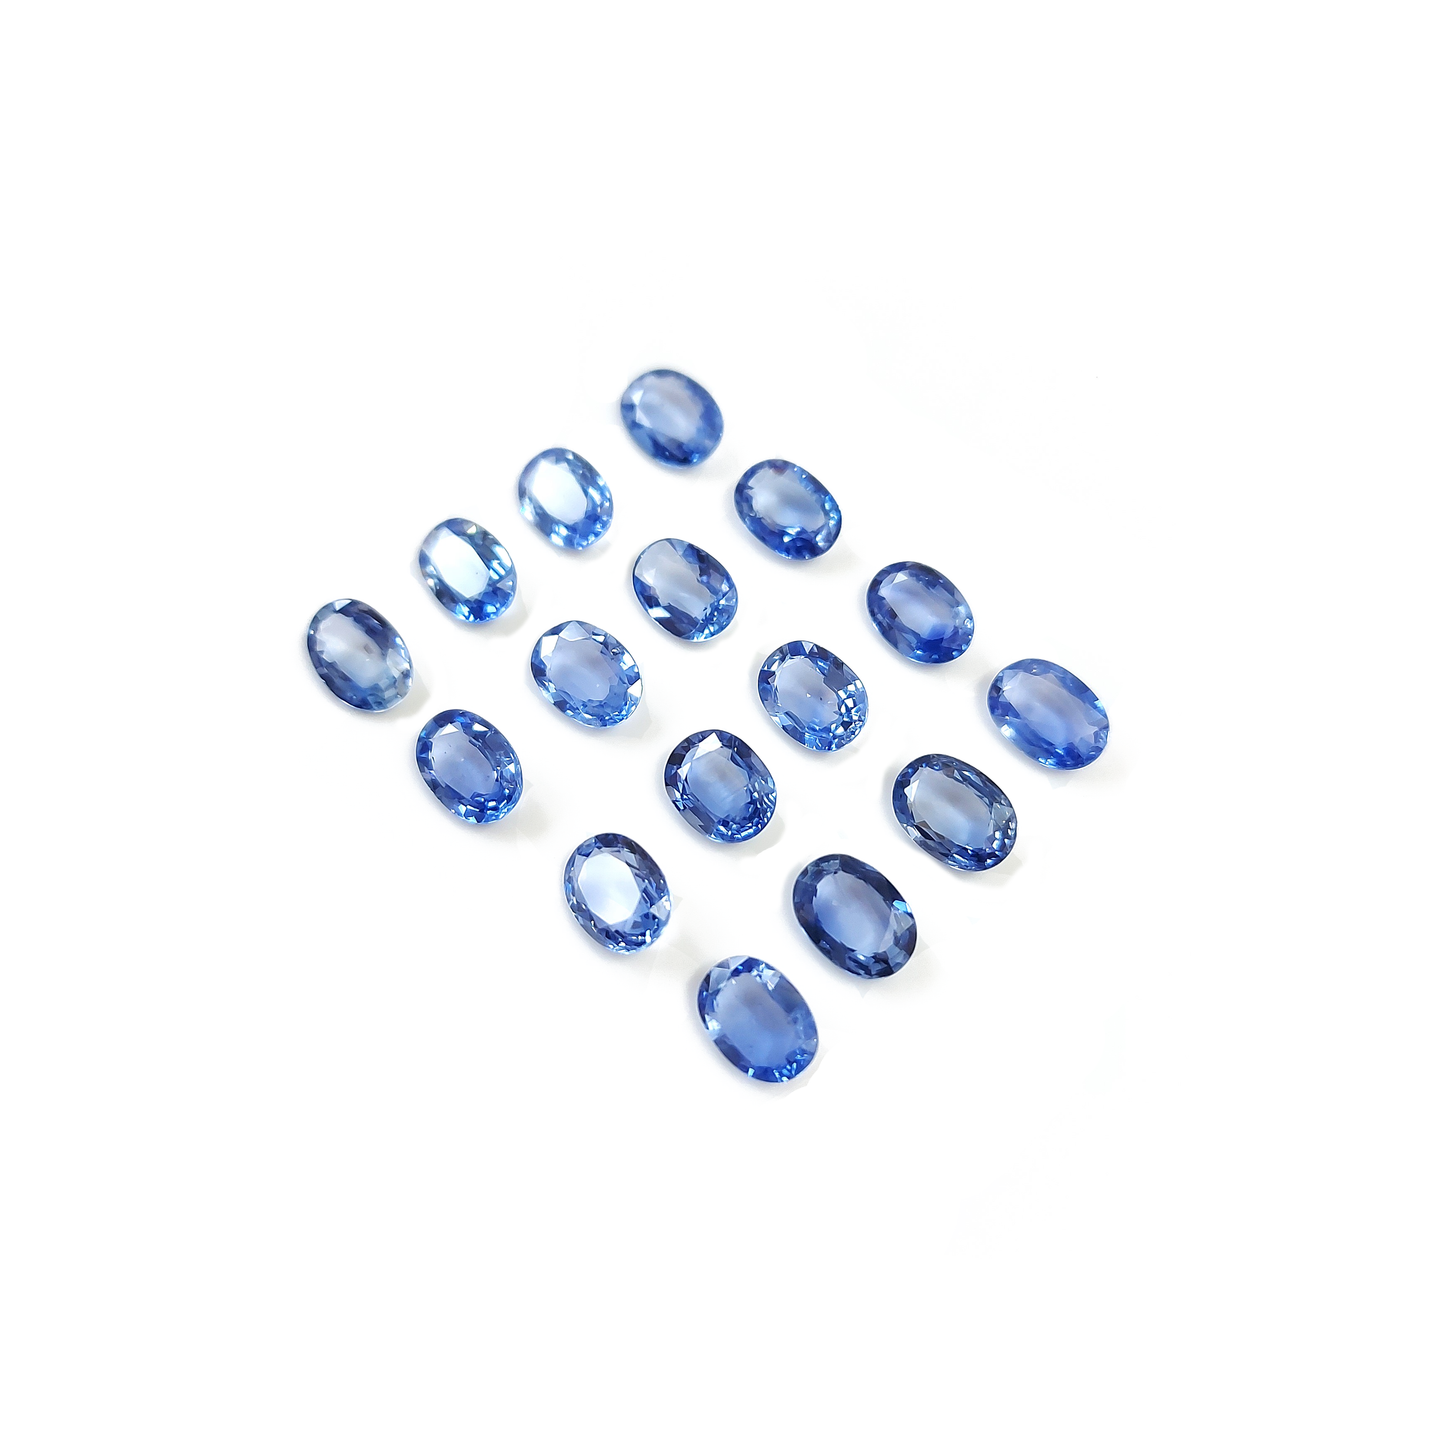 100% Natural Ceylon Blue Sapphire Heated Calibrated Ovals